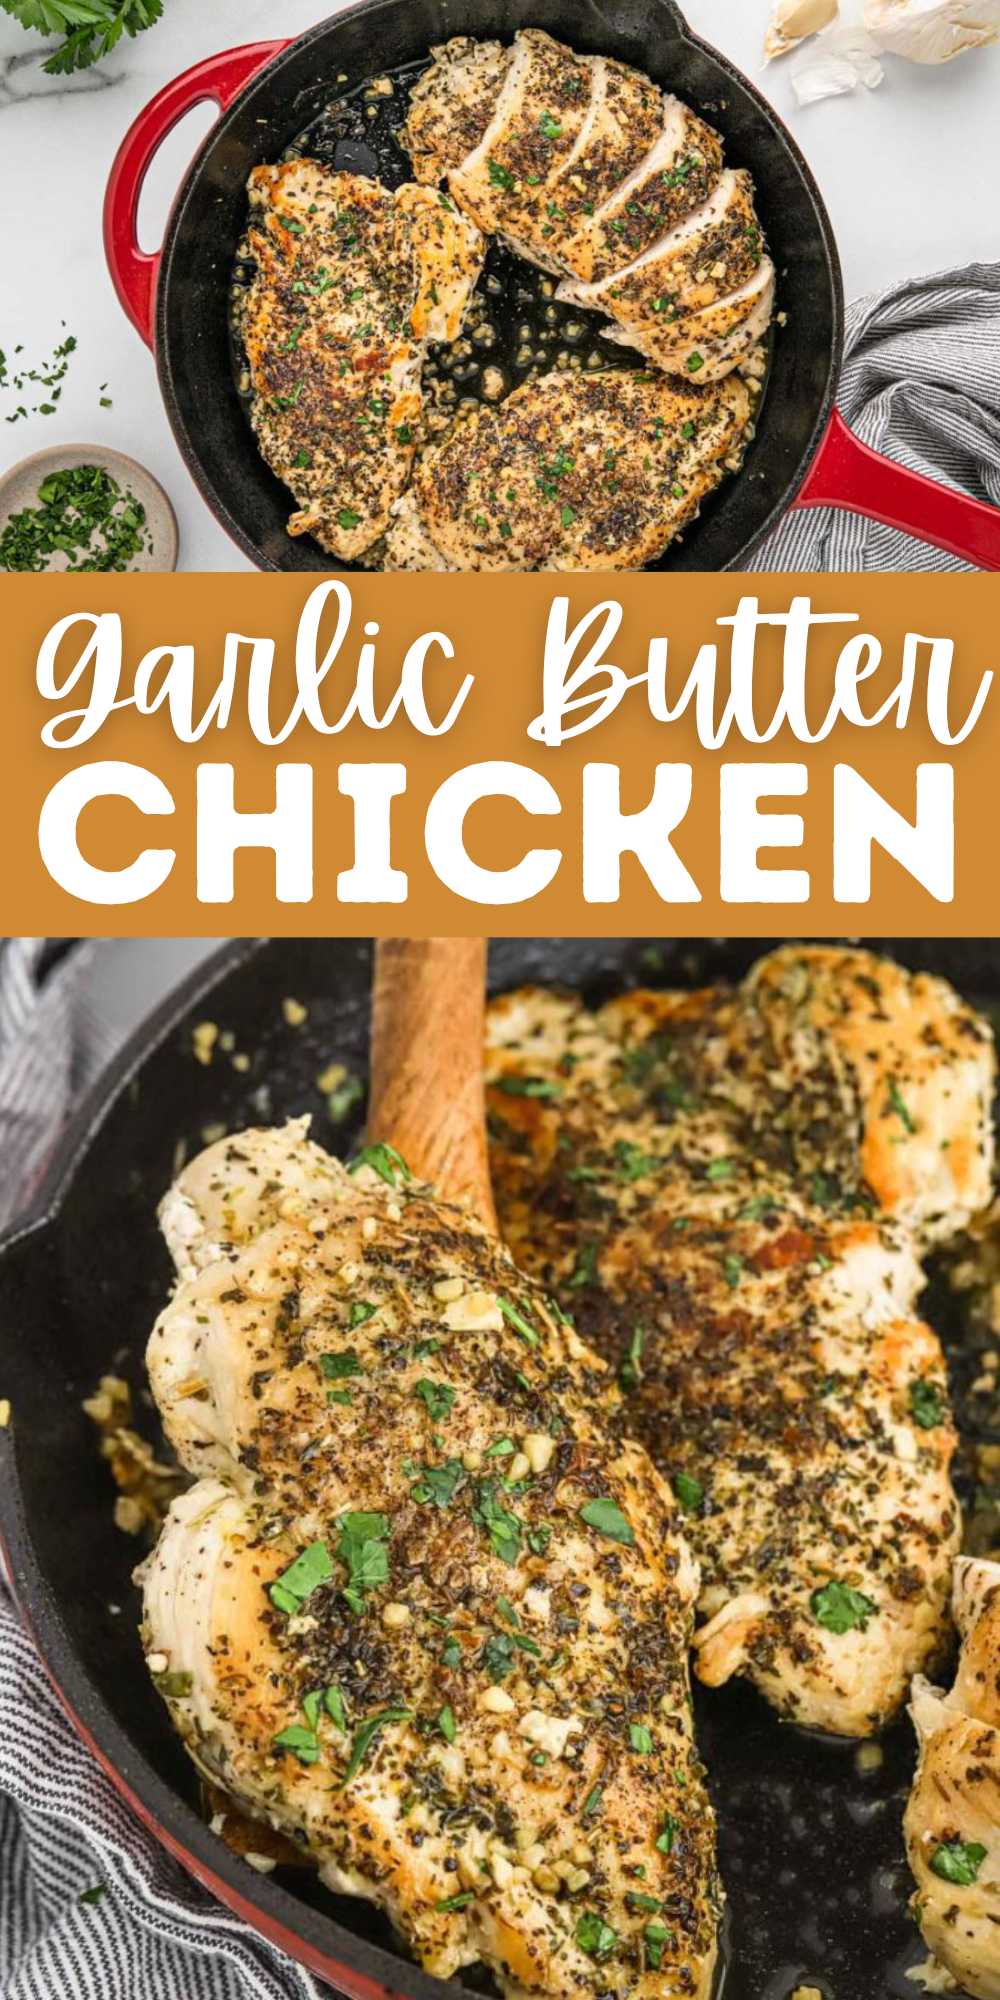 Garlic Butter Chicken is a quick and easy skillet dinner recipe. Chicken is cooked in a delicious garlic butter sauce in about 20 minutes. You can easily serve this chicken breast recipe over white rice or some egg noodles. Add a side salad or roasted vegetables to complete this meal. Rich, hearty and delicious this is sure to be a crowd favorite. #eatingonadime #garlicbutterchicken #chickenrecipe